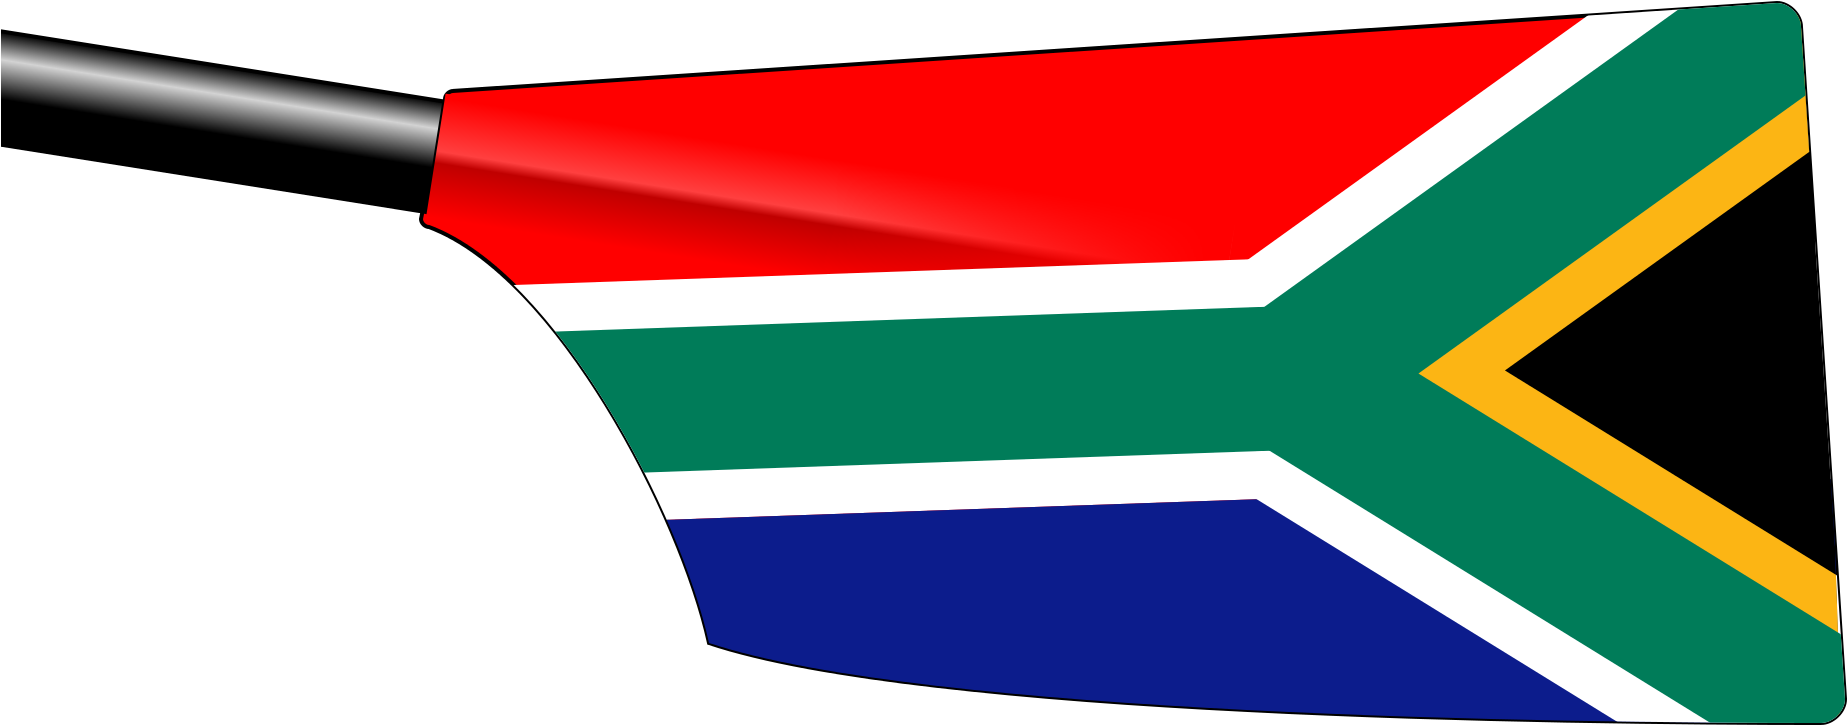 Open - South Africa National Cricket Team (2000x920)